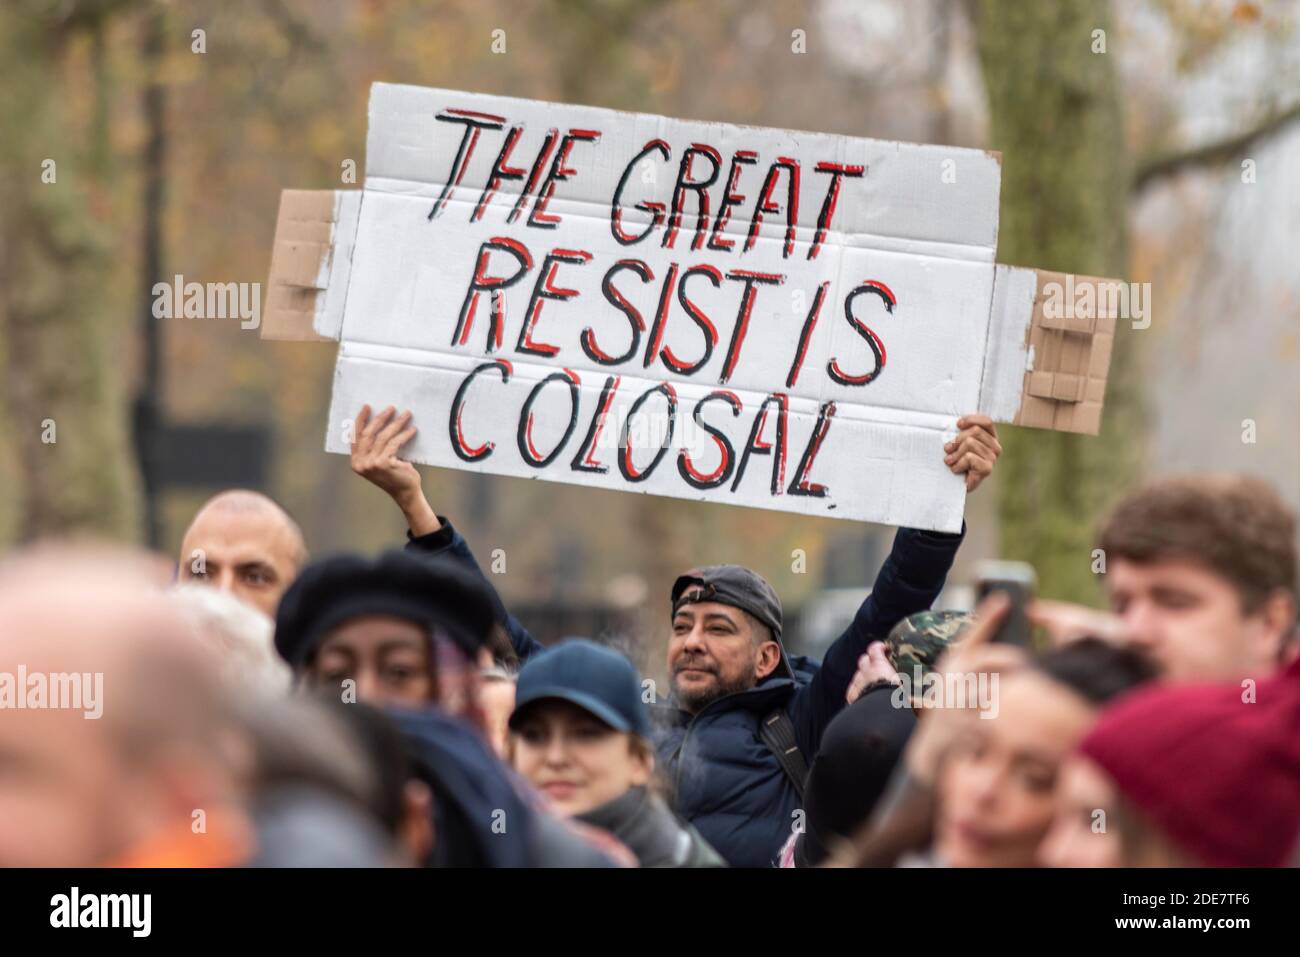 The great resist is colossal, misspelt, banner at a COVID 19 Coronavirus anti lockdown protest march in London, UK Stock Photo